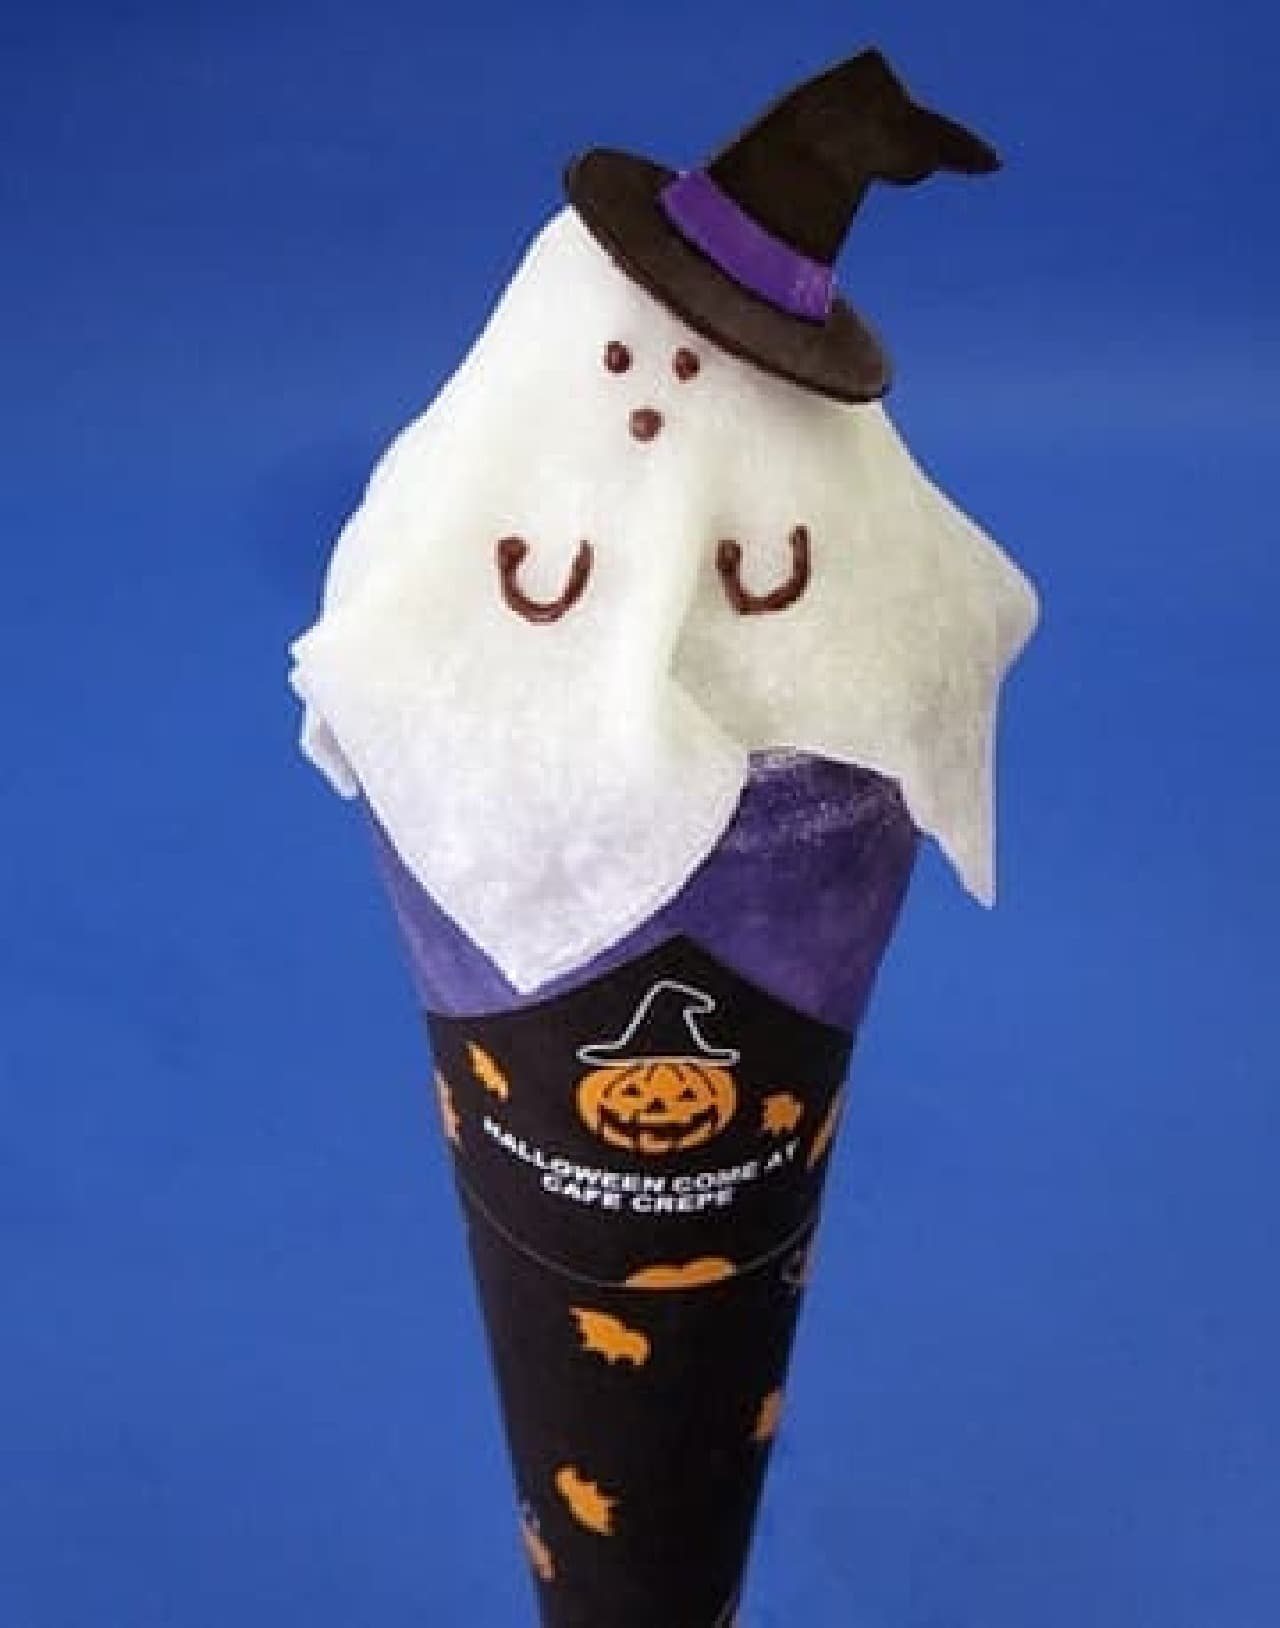 CAFE CREPE "Ghost Crepe"